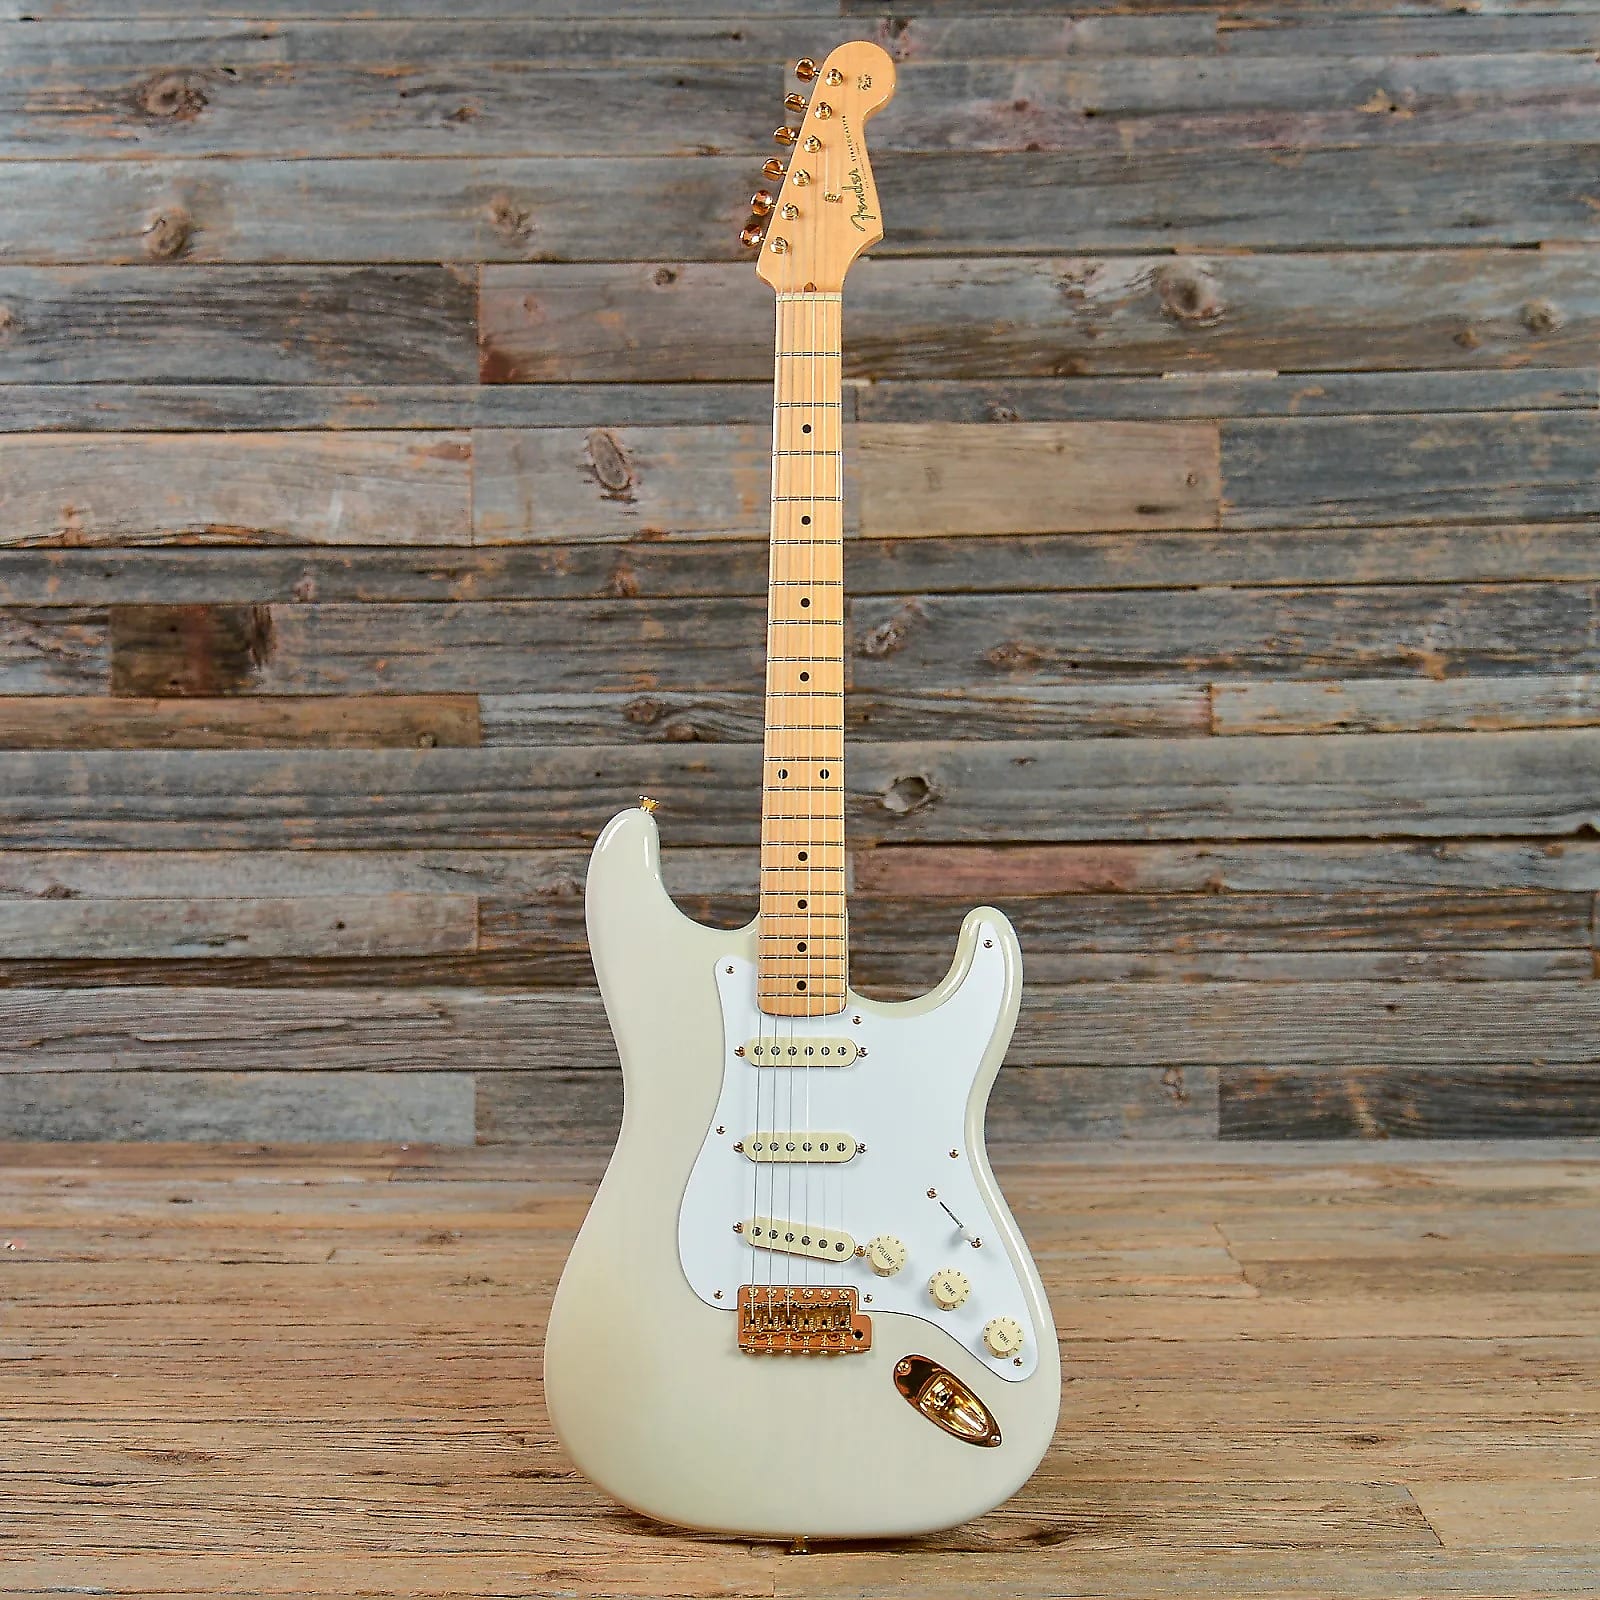 Fender 50th Anniversary American Vintage '57 Stratocaster Mary Kaye | Reverb